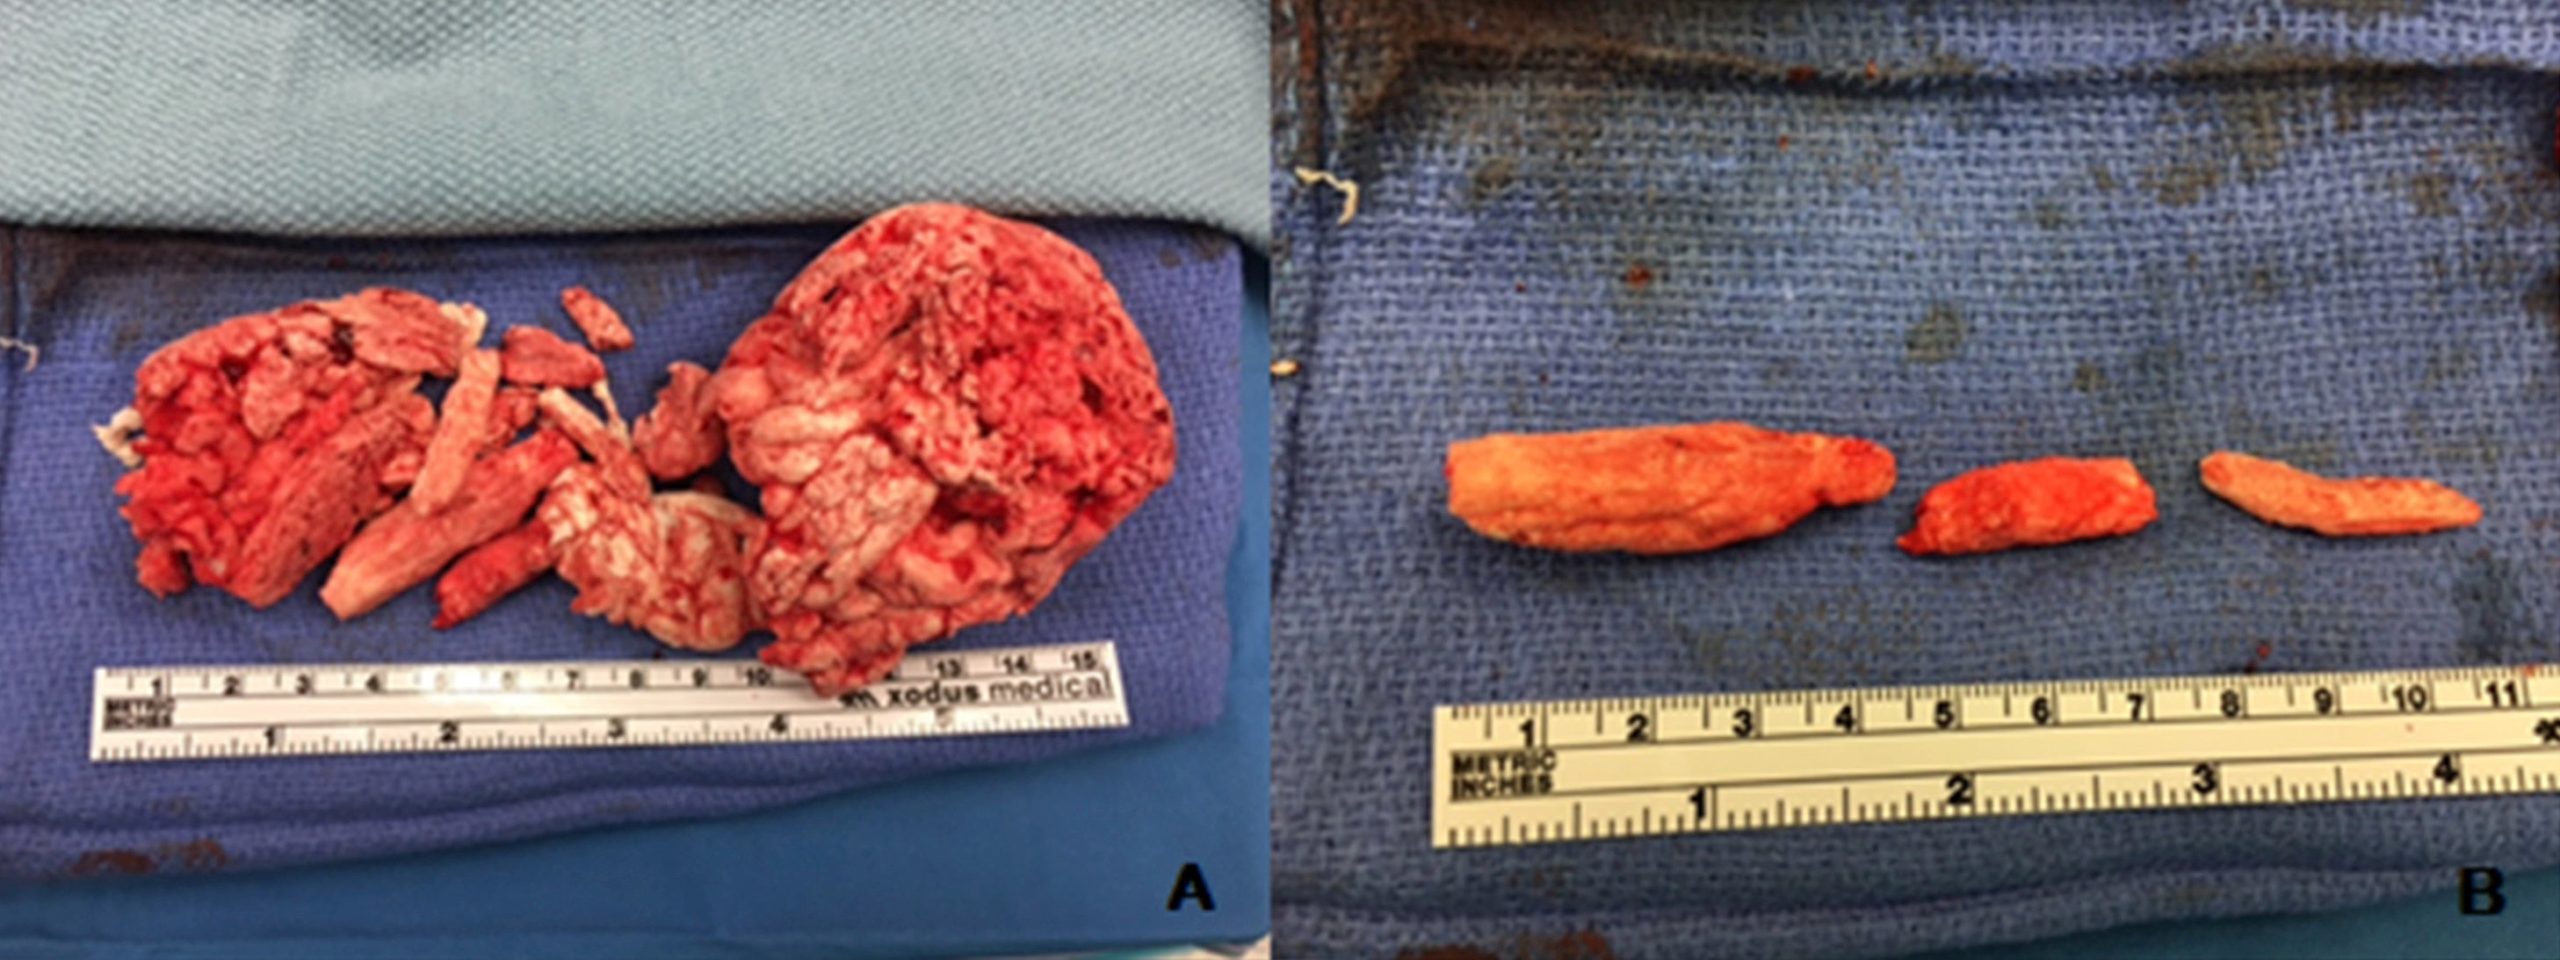 The foam removed from the man's bladder and urethra.  (Photo: RosaPark, Susan M.MacDonald/Urology Case Reports)